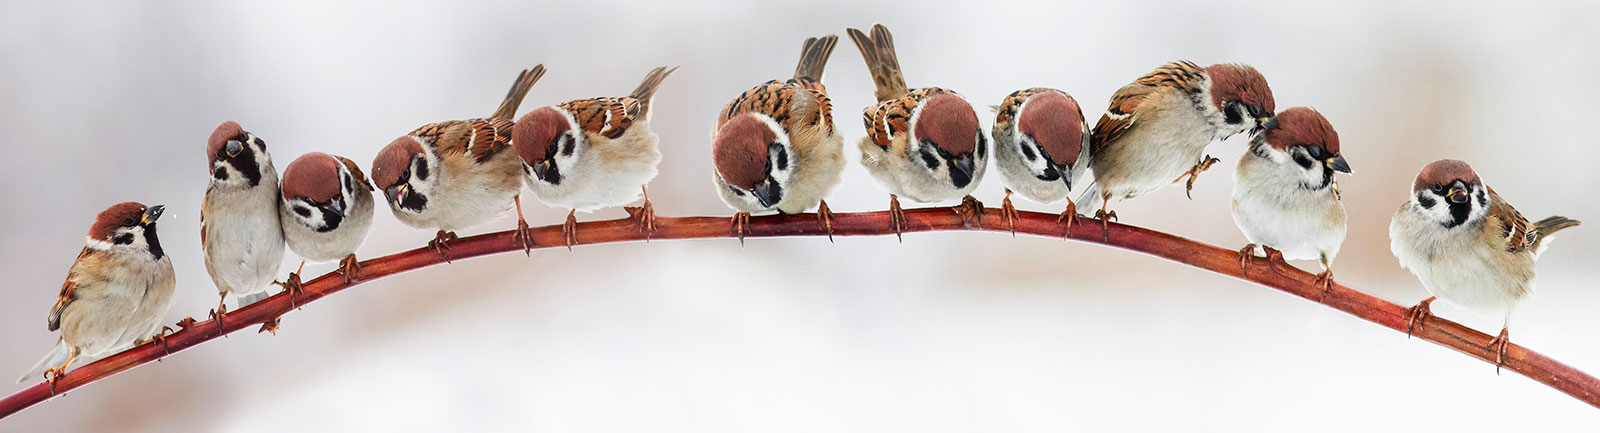 eleven sparrows colsely slustered on a horizontal branch